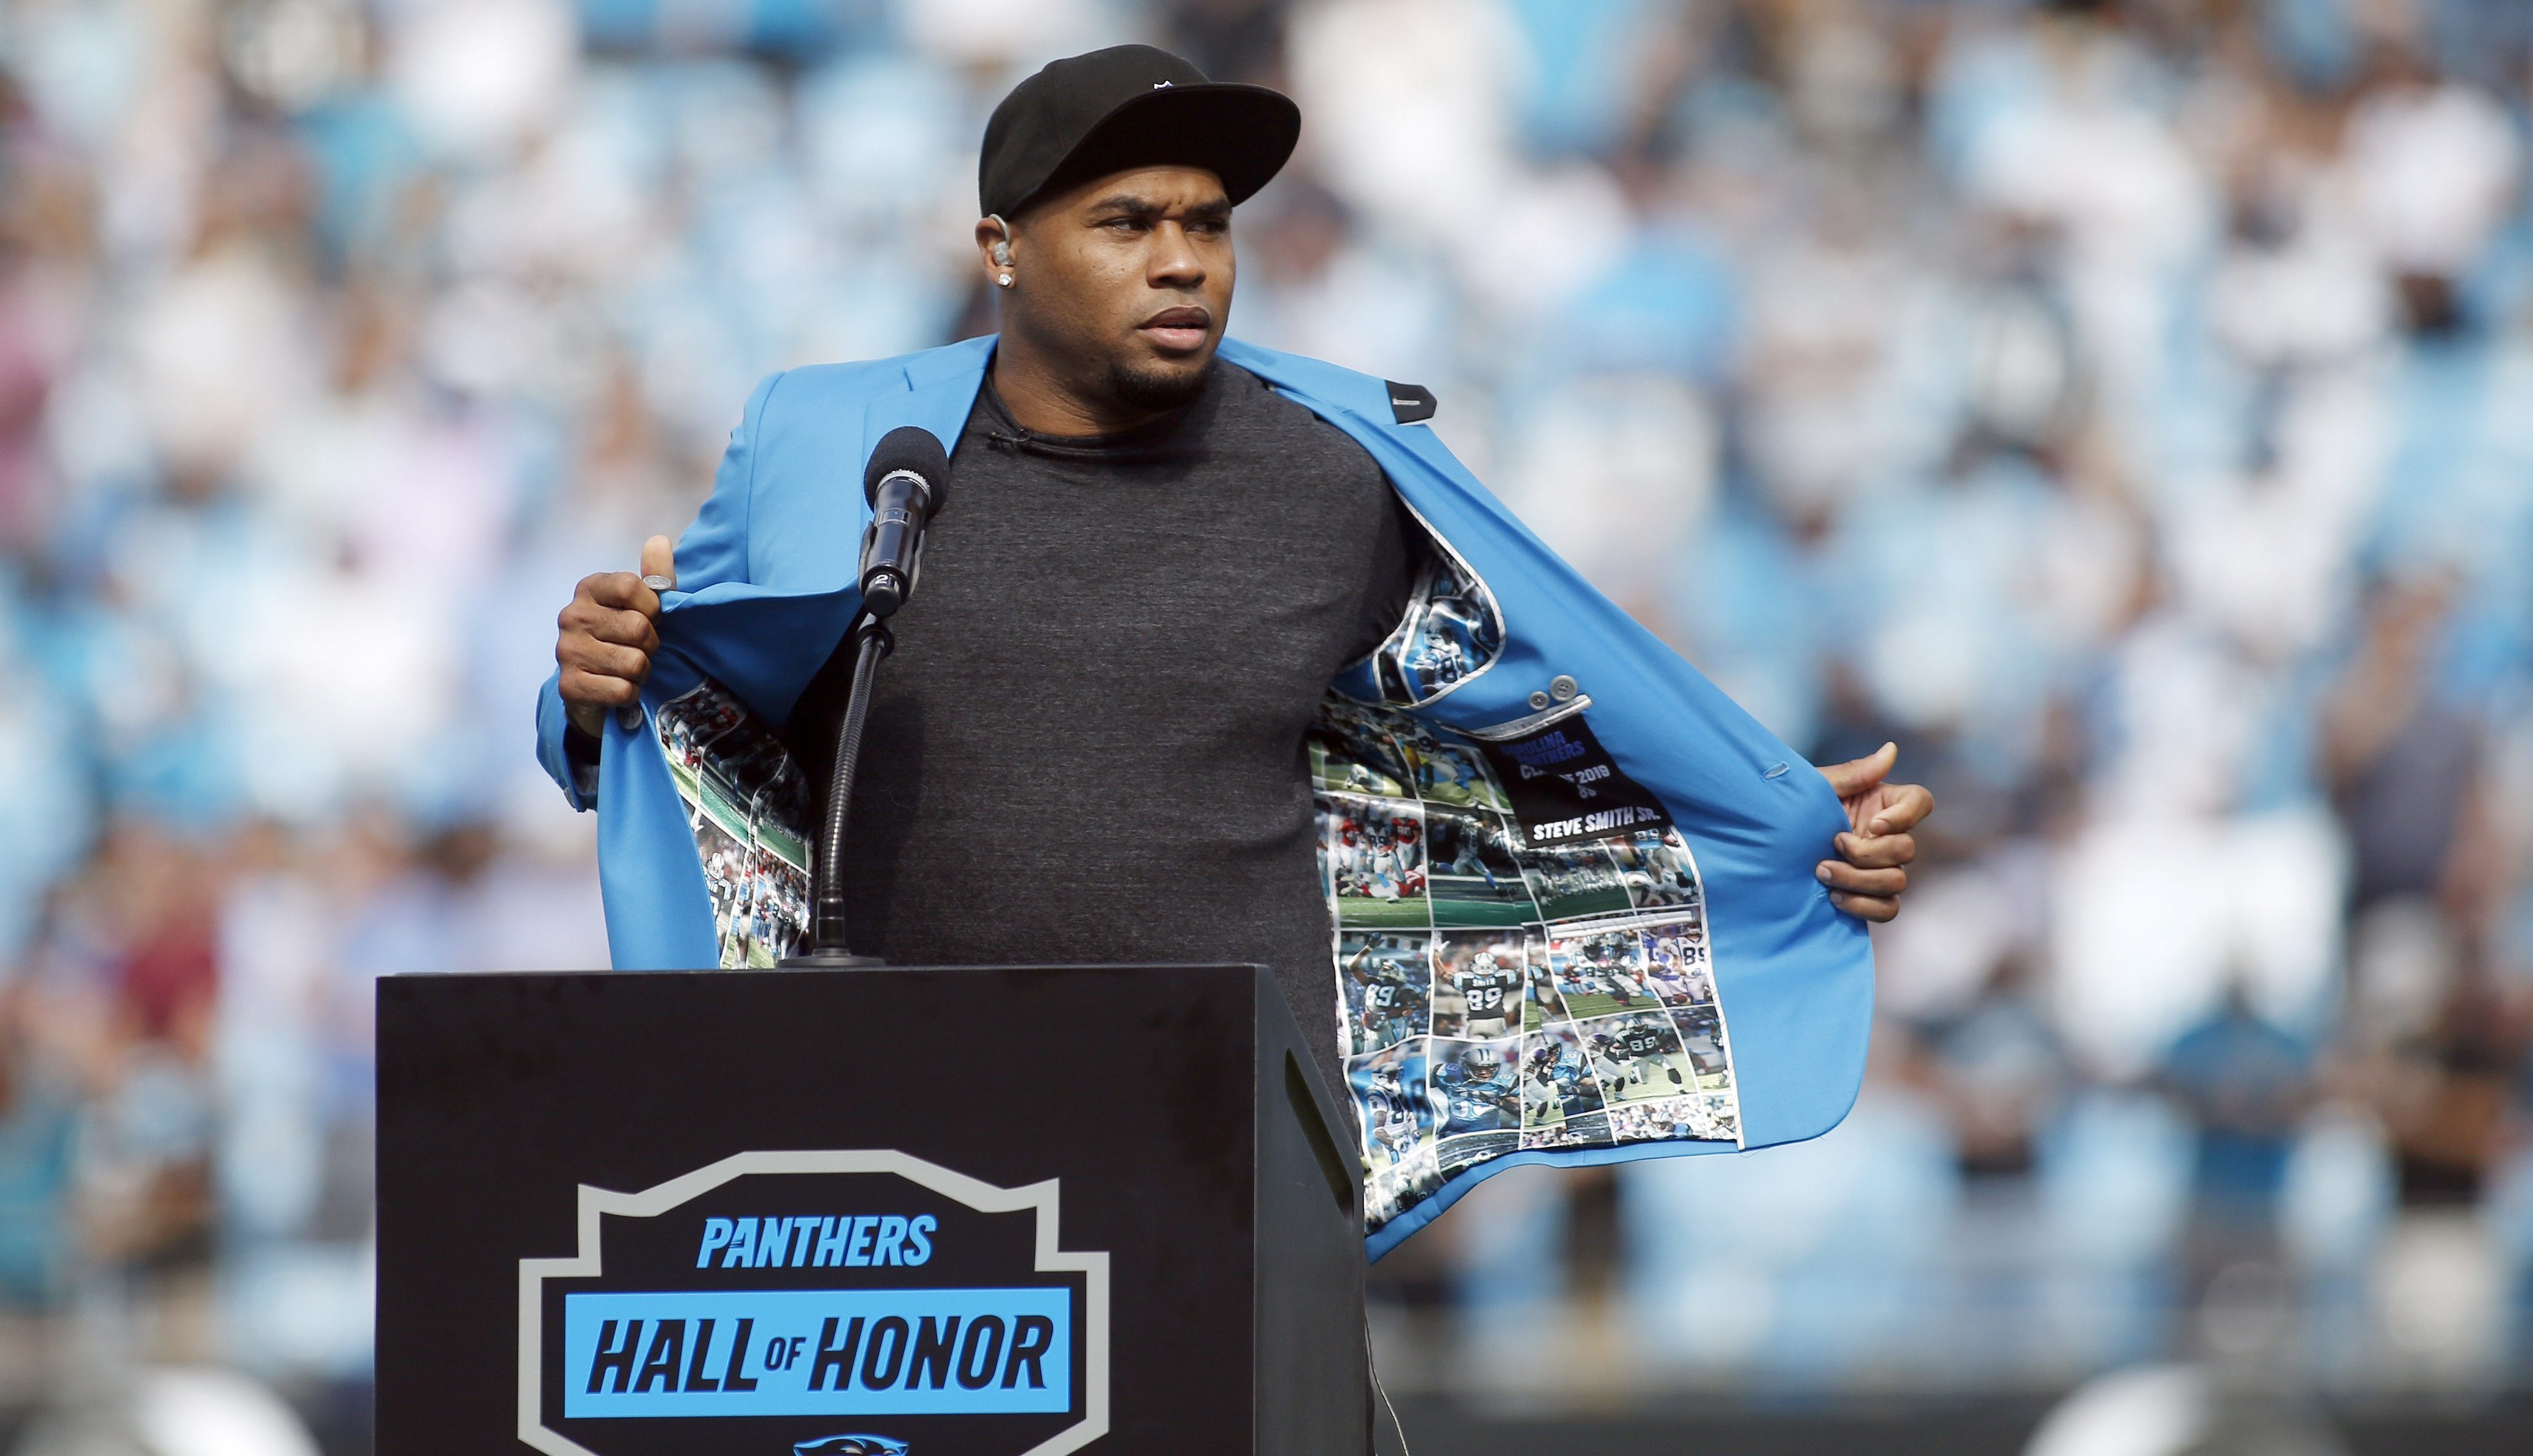 Who’s next Looking at candidates for the Panthers Hall of Honor The